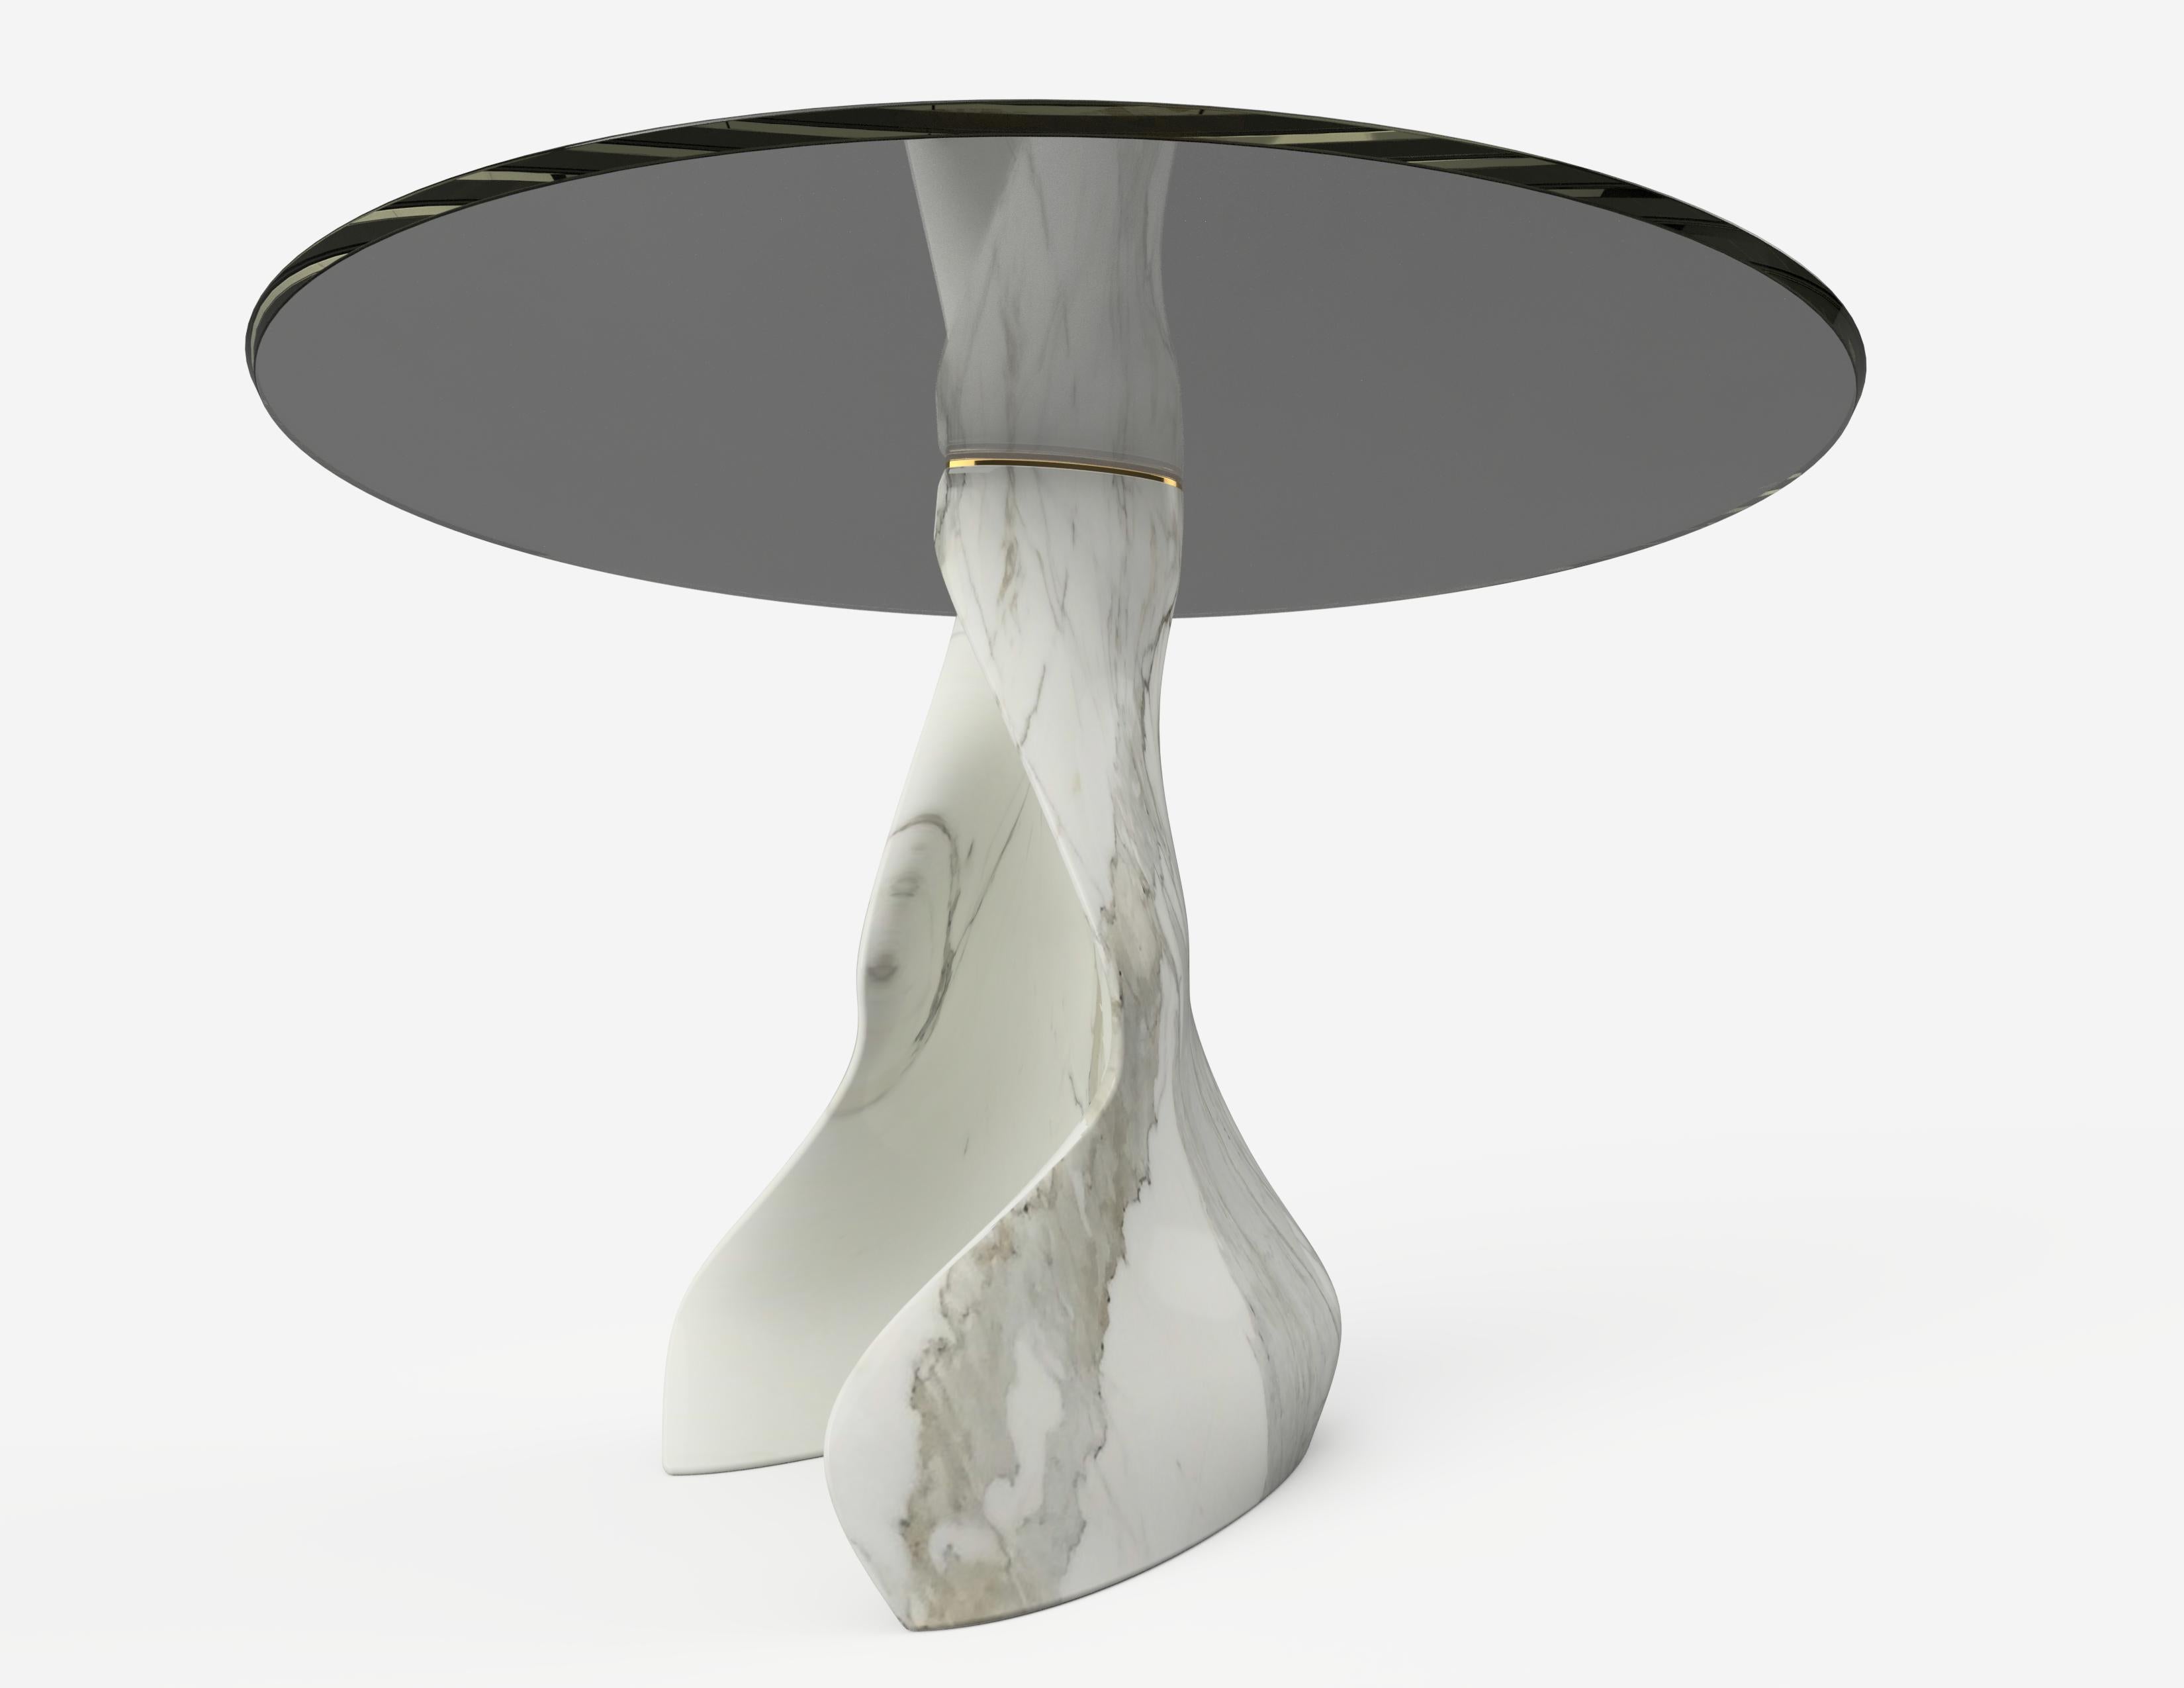 The Diamond touch II center table, 1 of 1 by Grzegorz Majka
Edition 1 of 1
Dimensions: 47.24 x 47.24 x 29.53 in
Materials: Smoked glass top. Onyx base. Brass details. 


The Diamond collection proves that everything is possible. It goes beyond